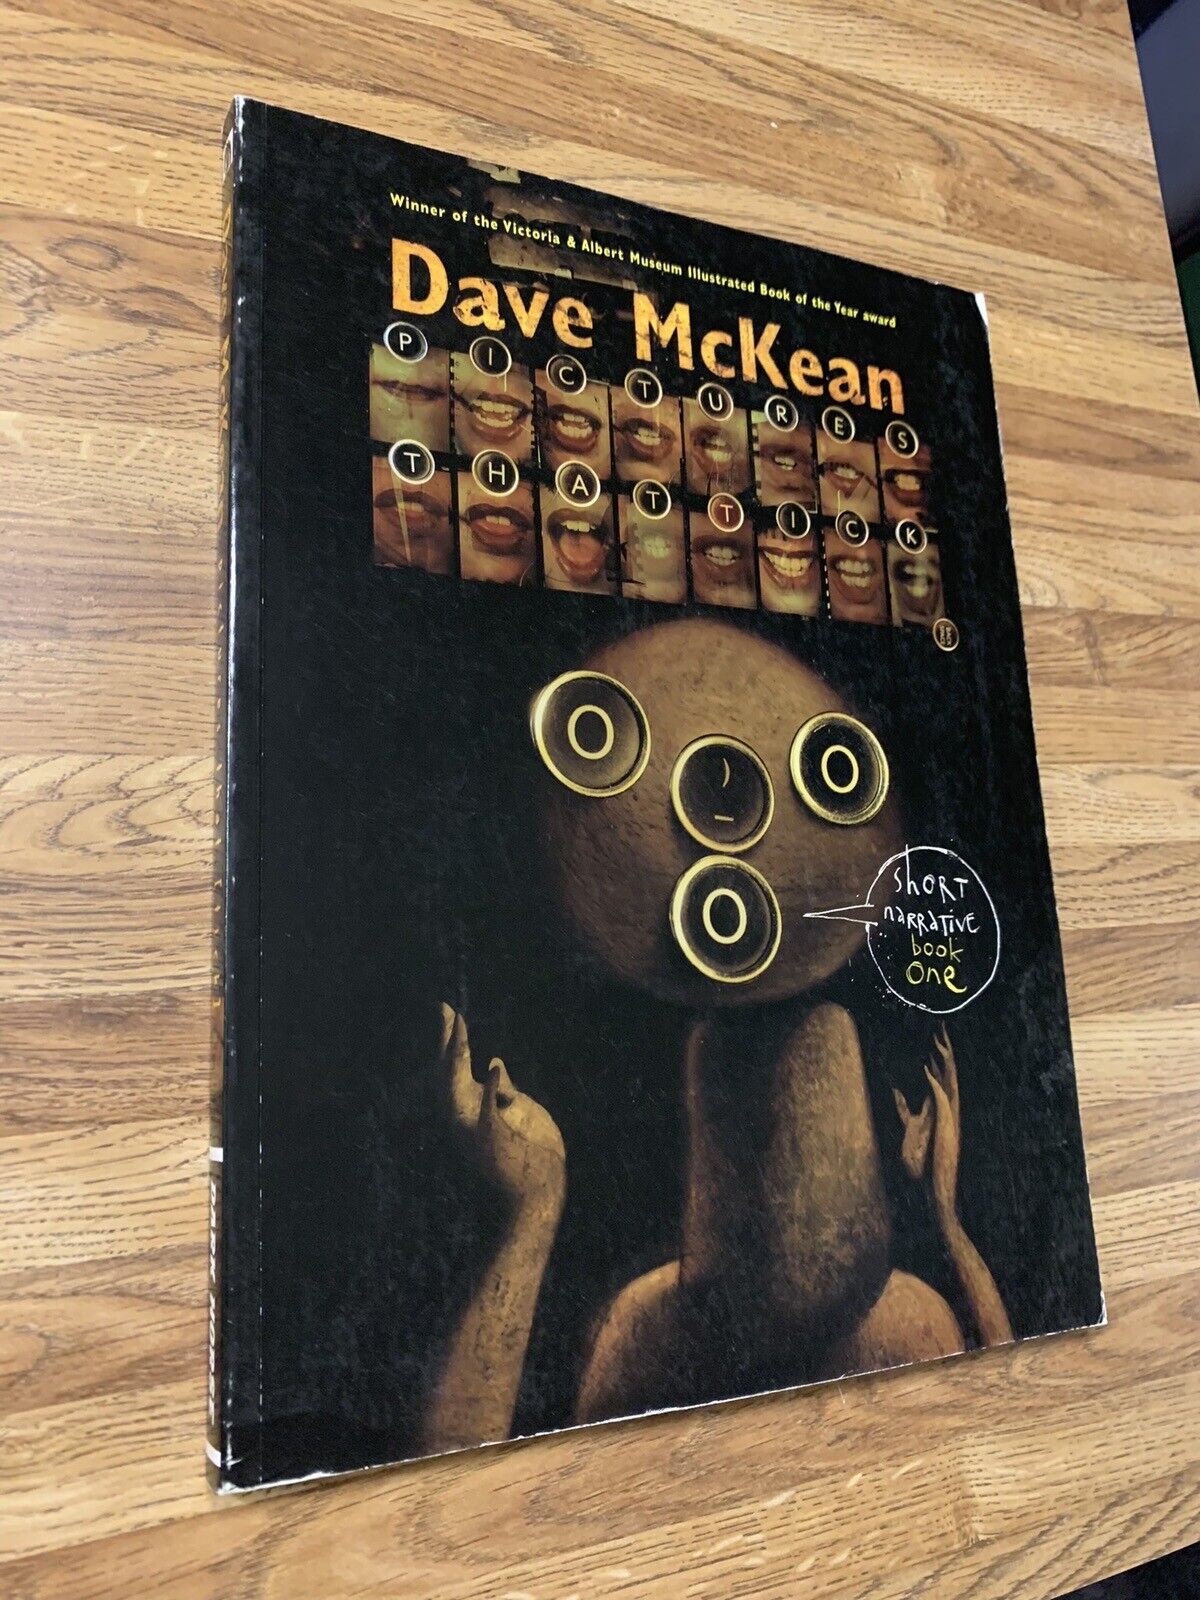 Pictures that Tick Dave McKean Volume One Short Narrative Softcover